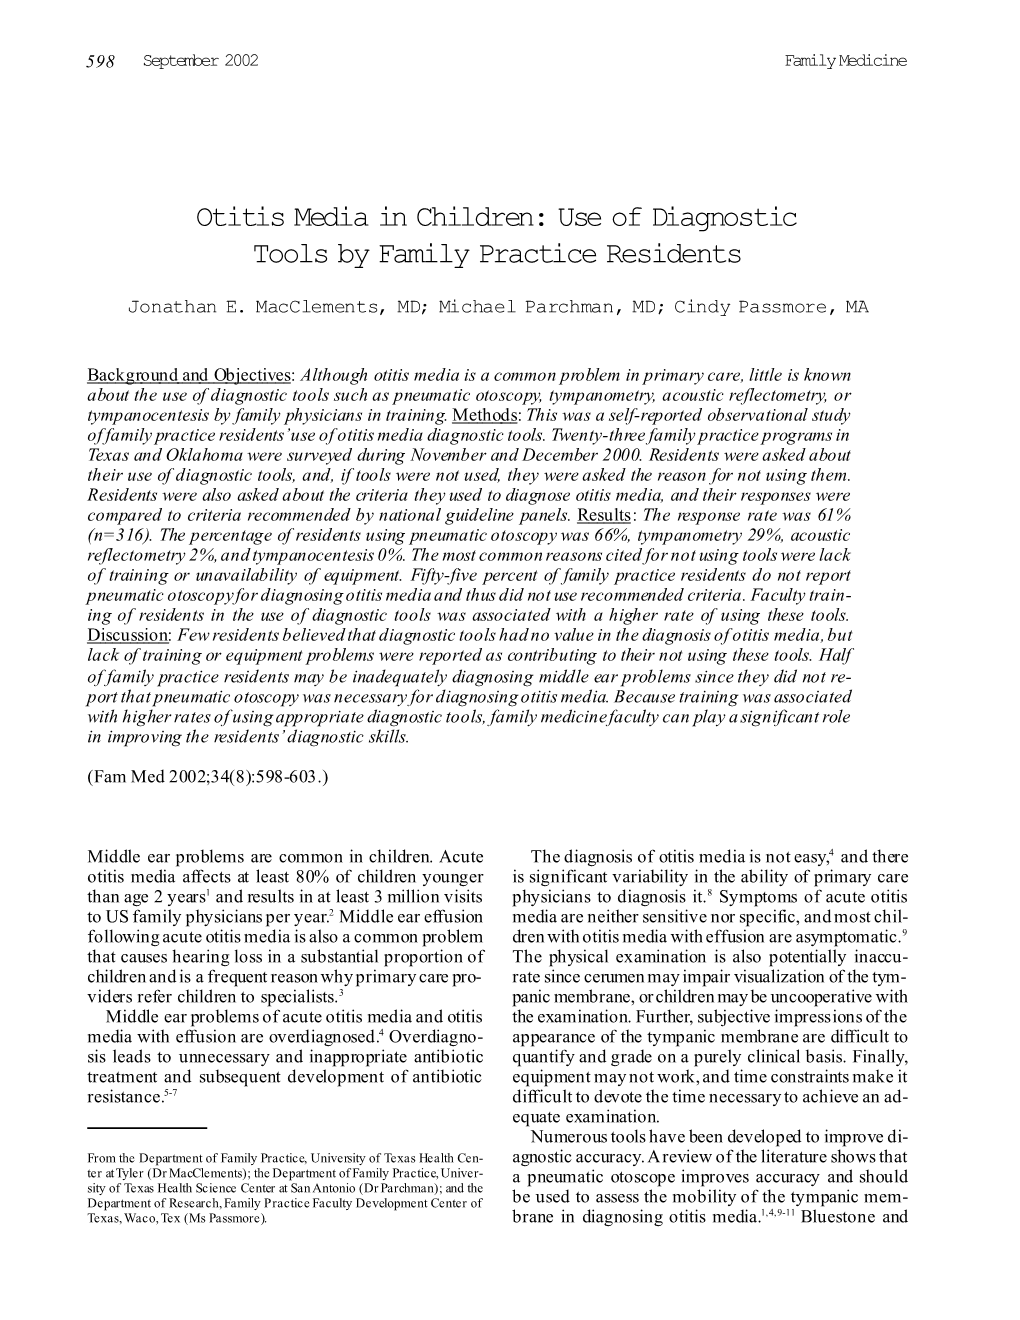 Otitis Media in Children: Use of Diagnostic Tools by Family Practice Residents